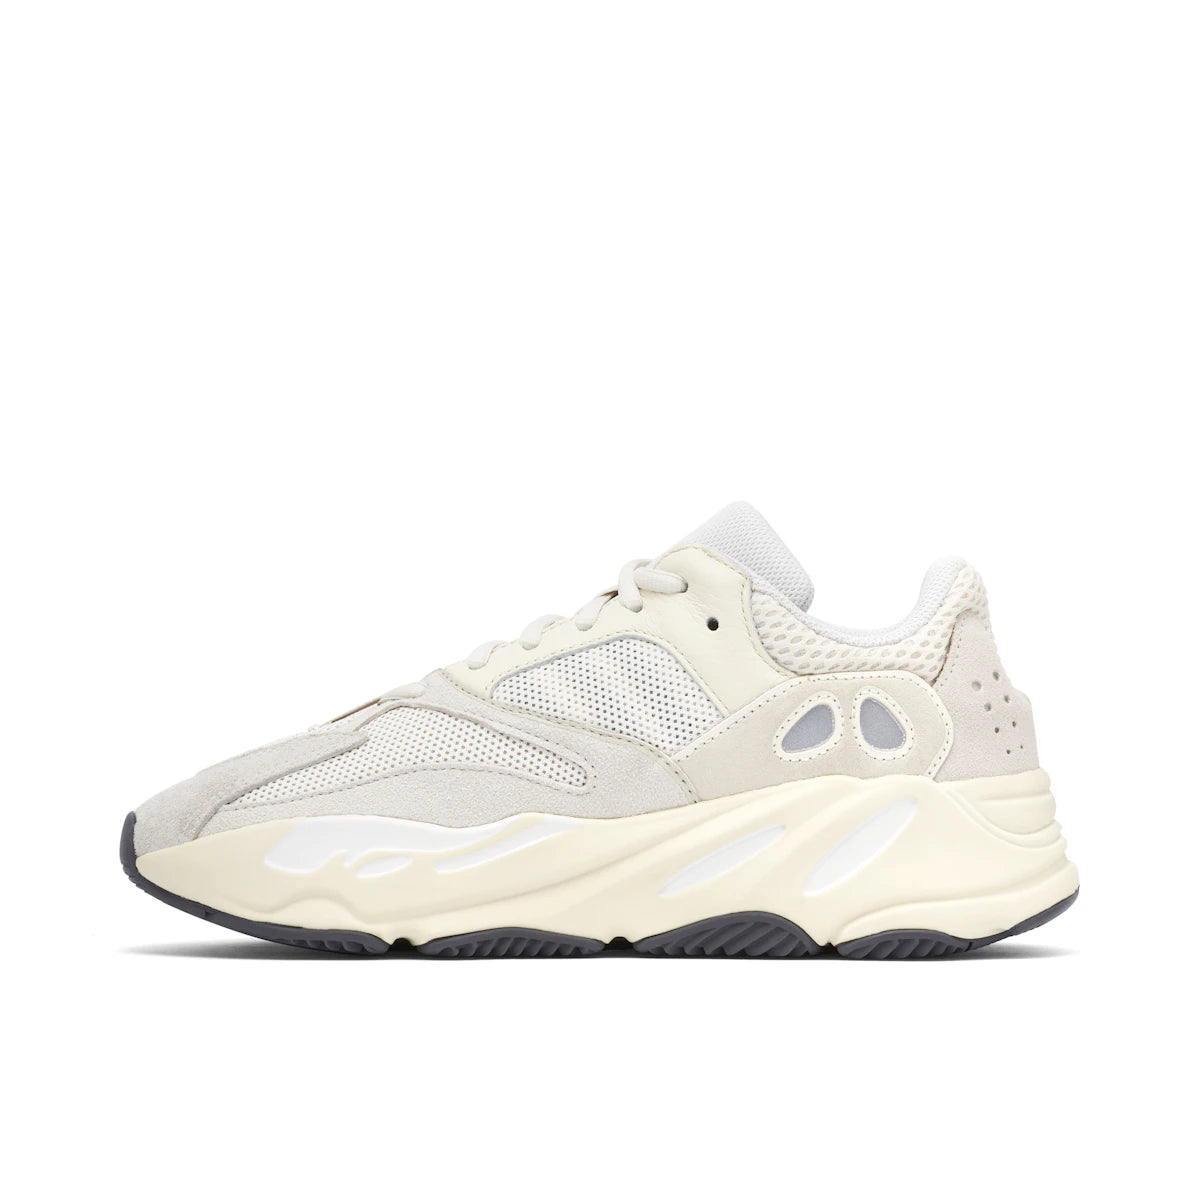 Adidas Yeezy Boost 700 Analog by Yeezy from £210.00